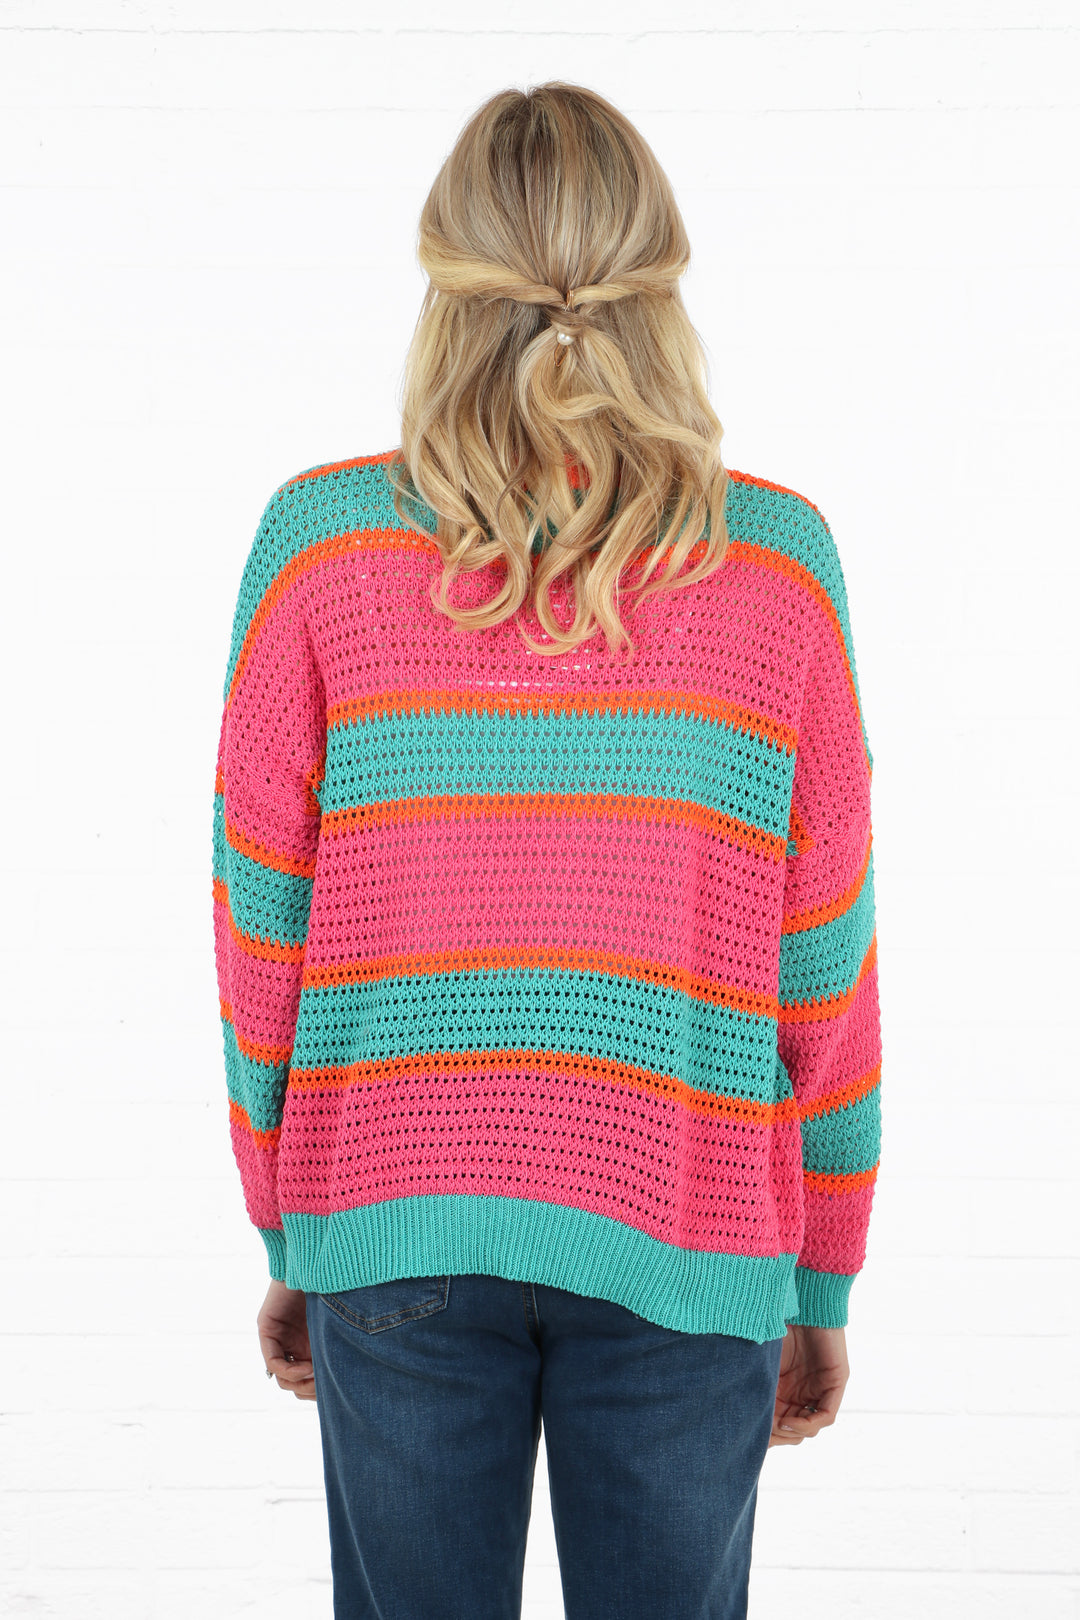 model showing the back of the stiped cardigan, showing the open knit material and pink, orange and turquoise striped pattern